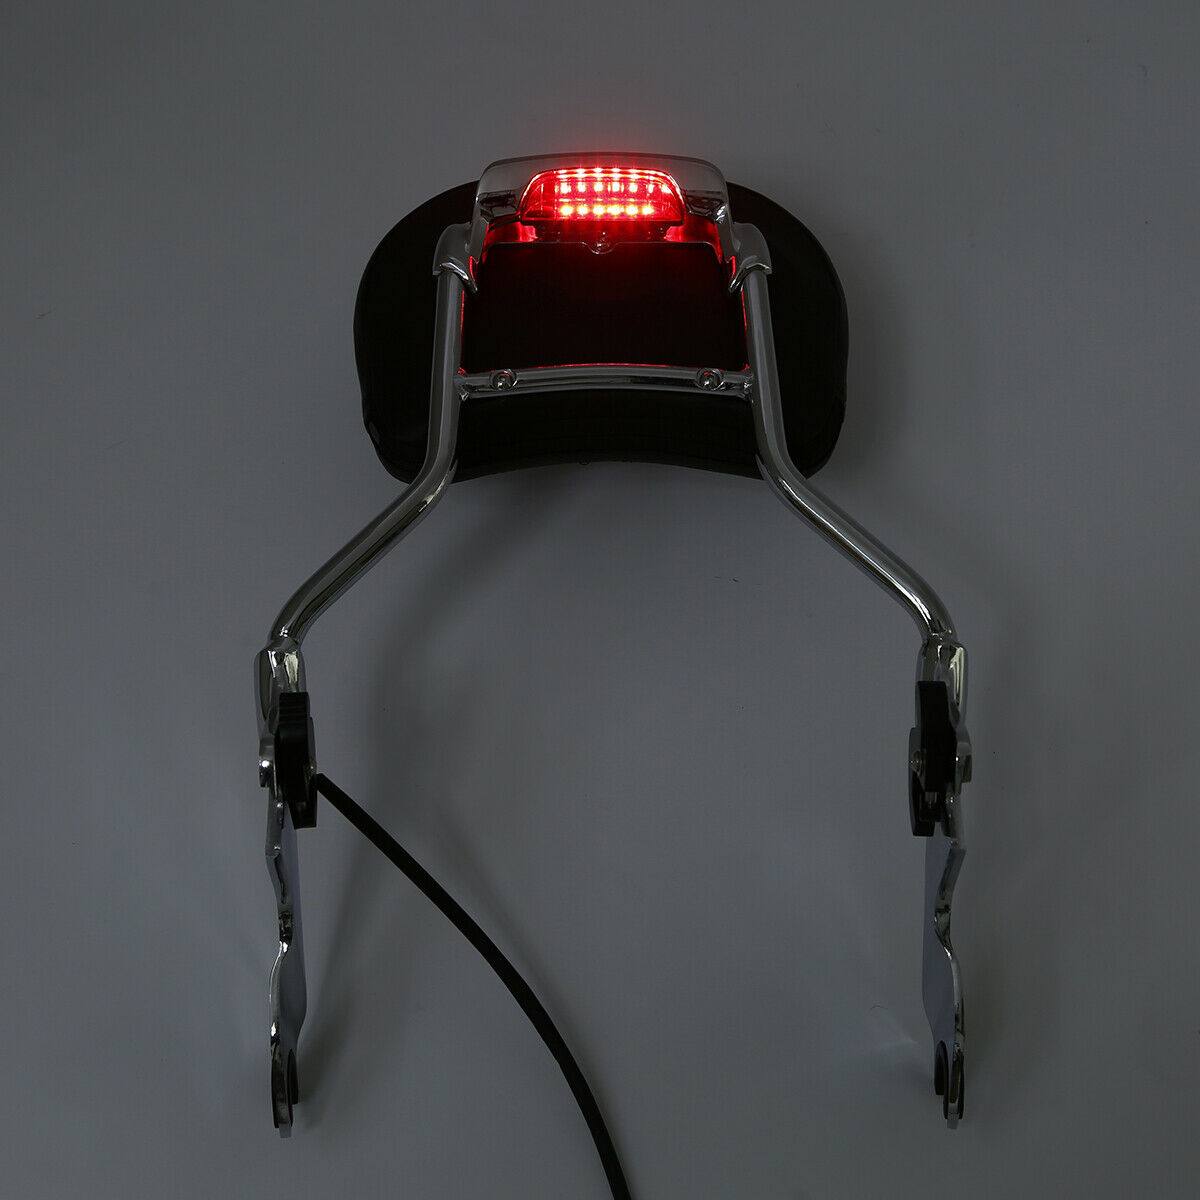 Sissy Bar Backrest Upright Red Brake Light Fit For Harley Touring 2014-2022 - Moto Life Products